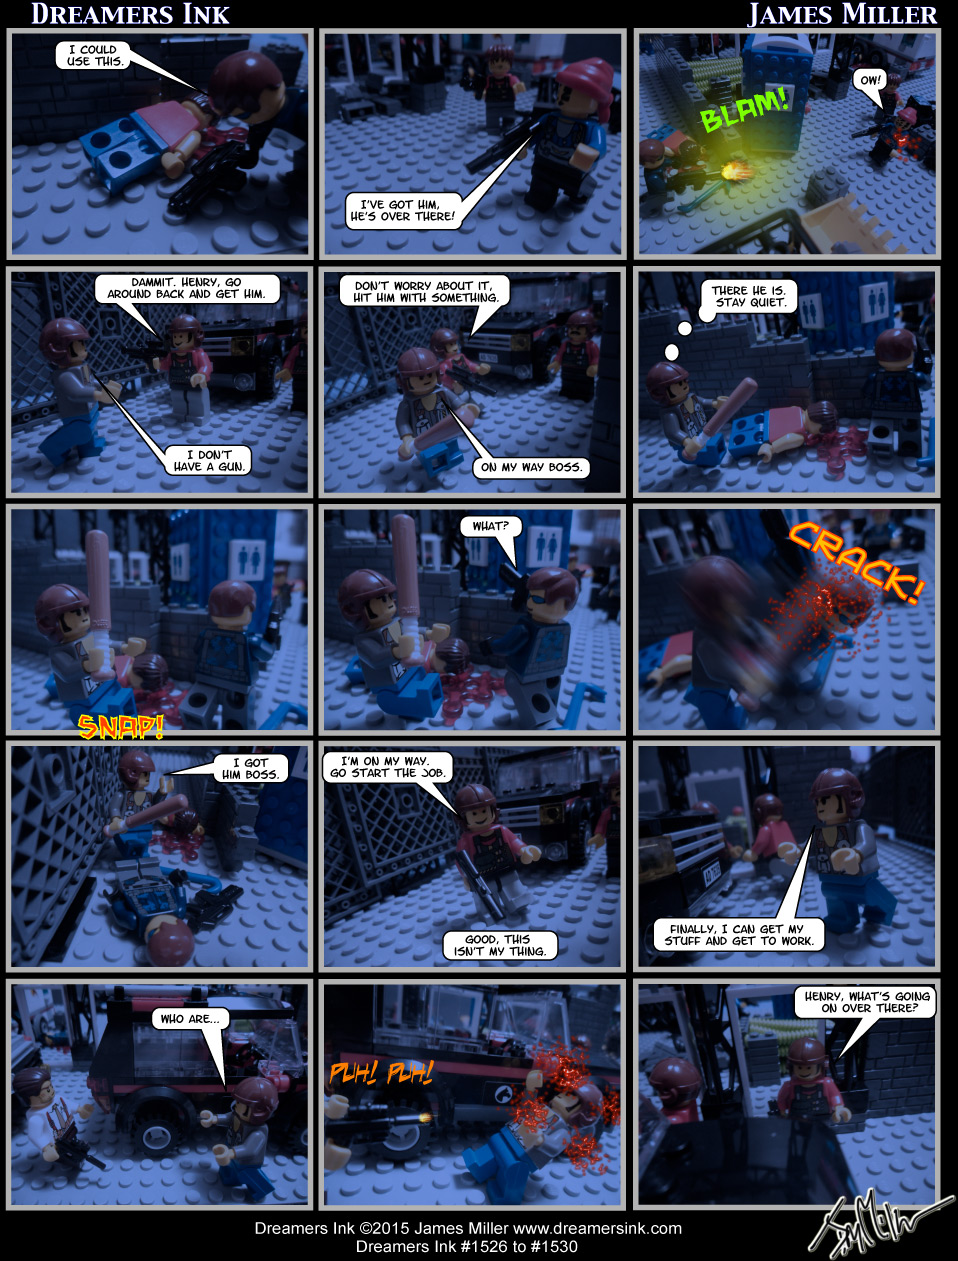 Strips #1526 To #1530